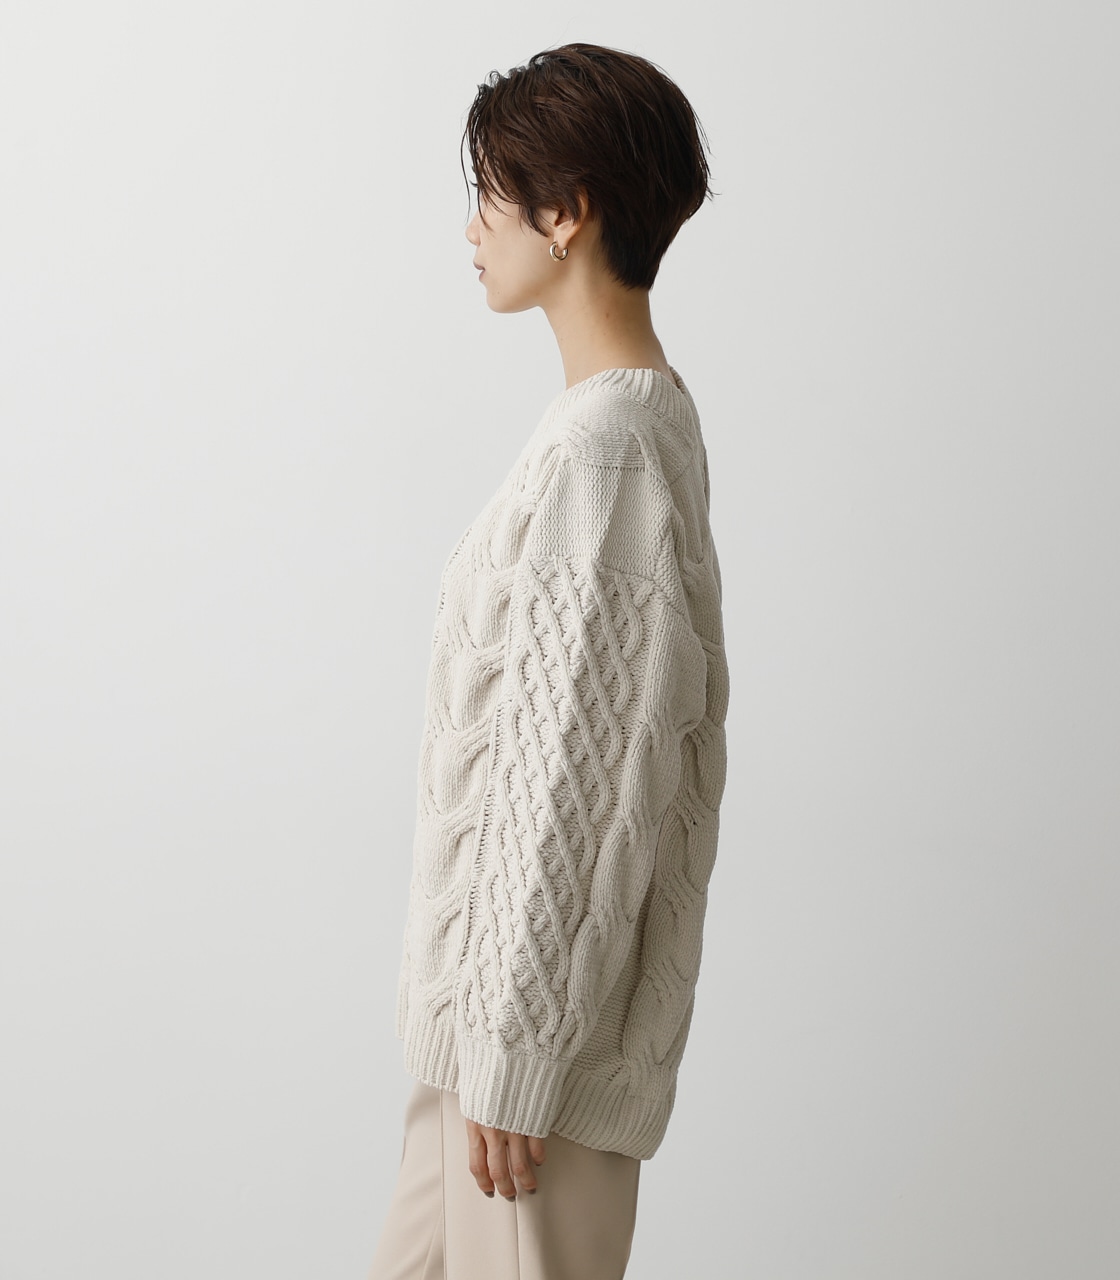 CHENILLE CABLE V/N KNIT TOPS/シェニールケーブルVネックニットトップス 詳細画像 IVOY 6